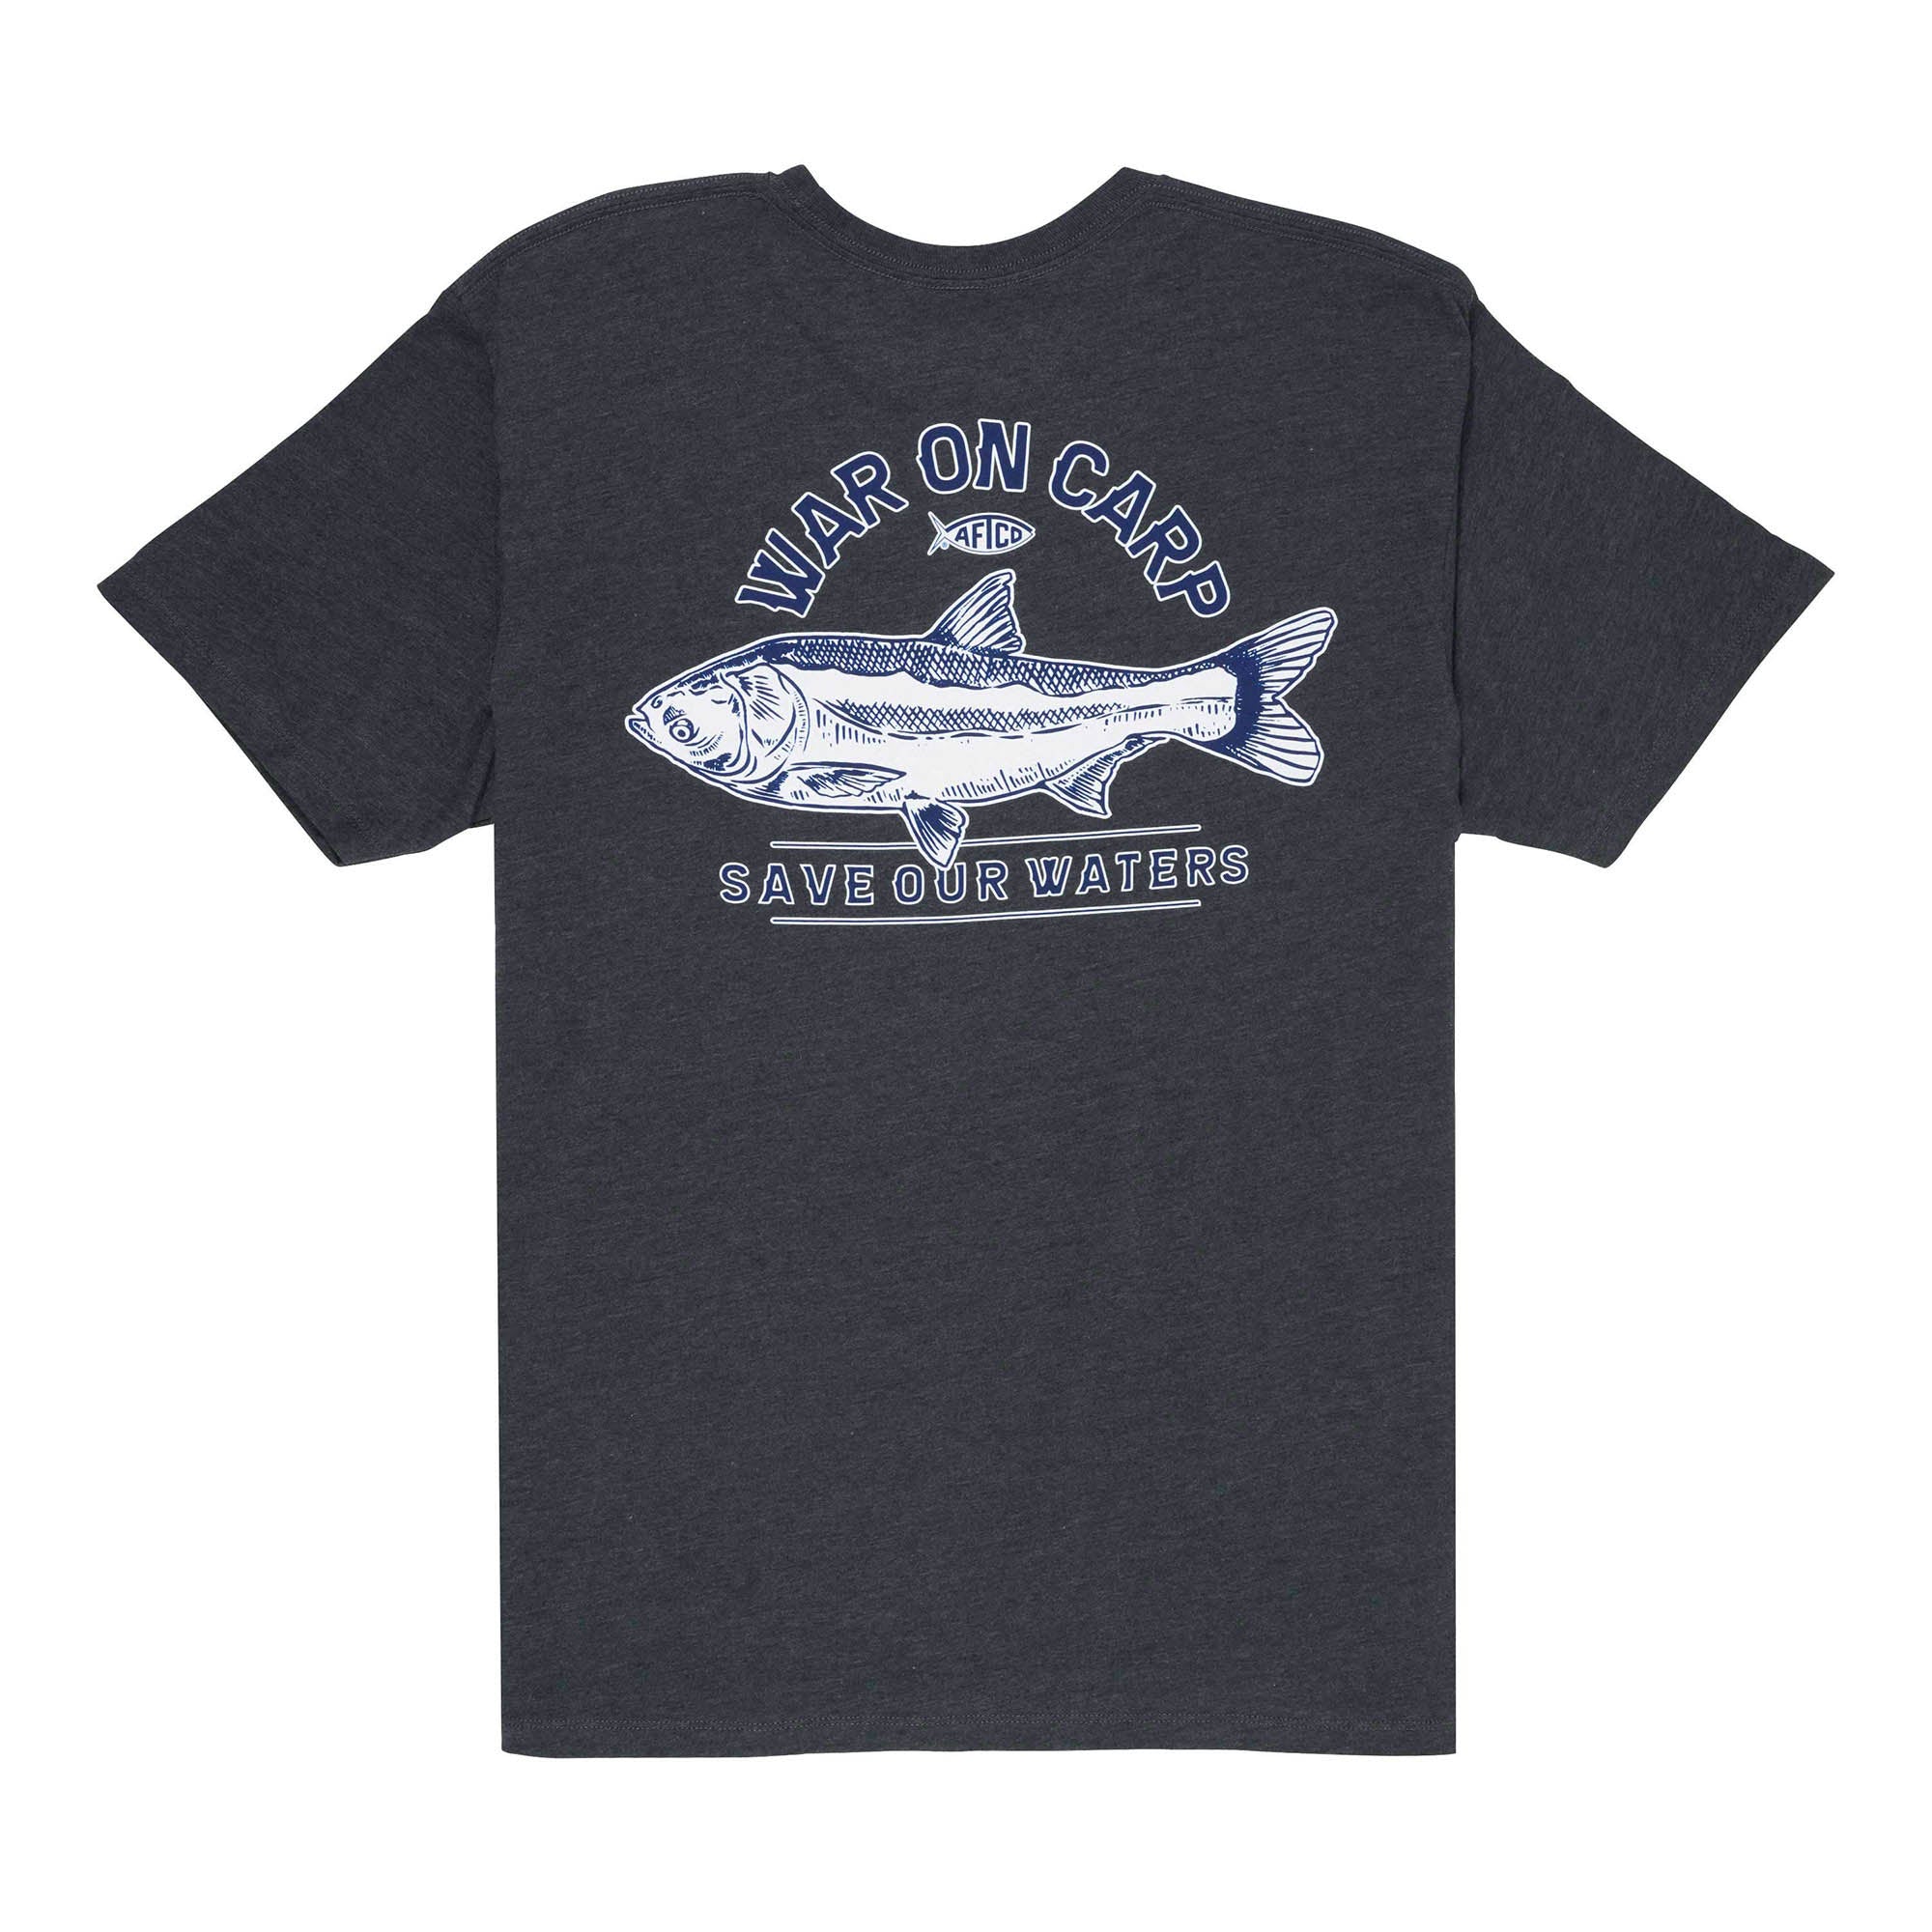 War On Carp SS T-Shirt, $5 Donation w/ Every Purchase